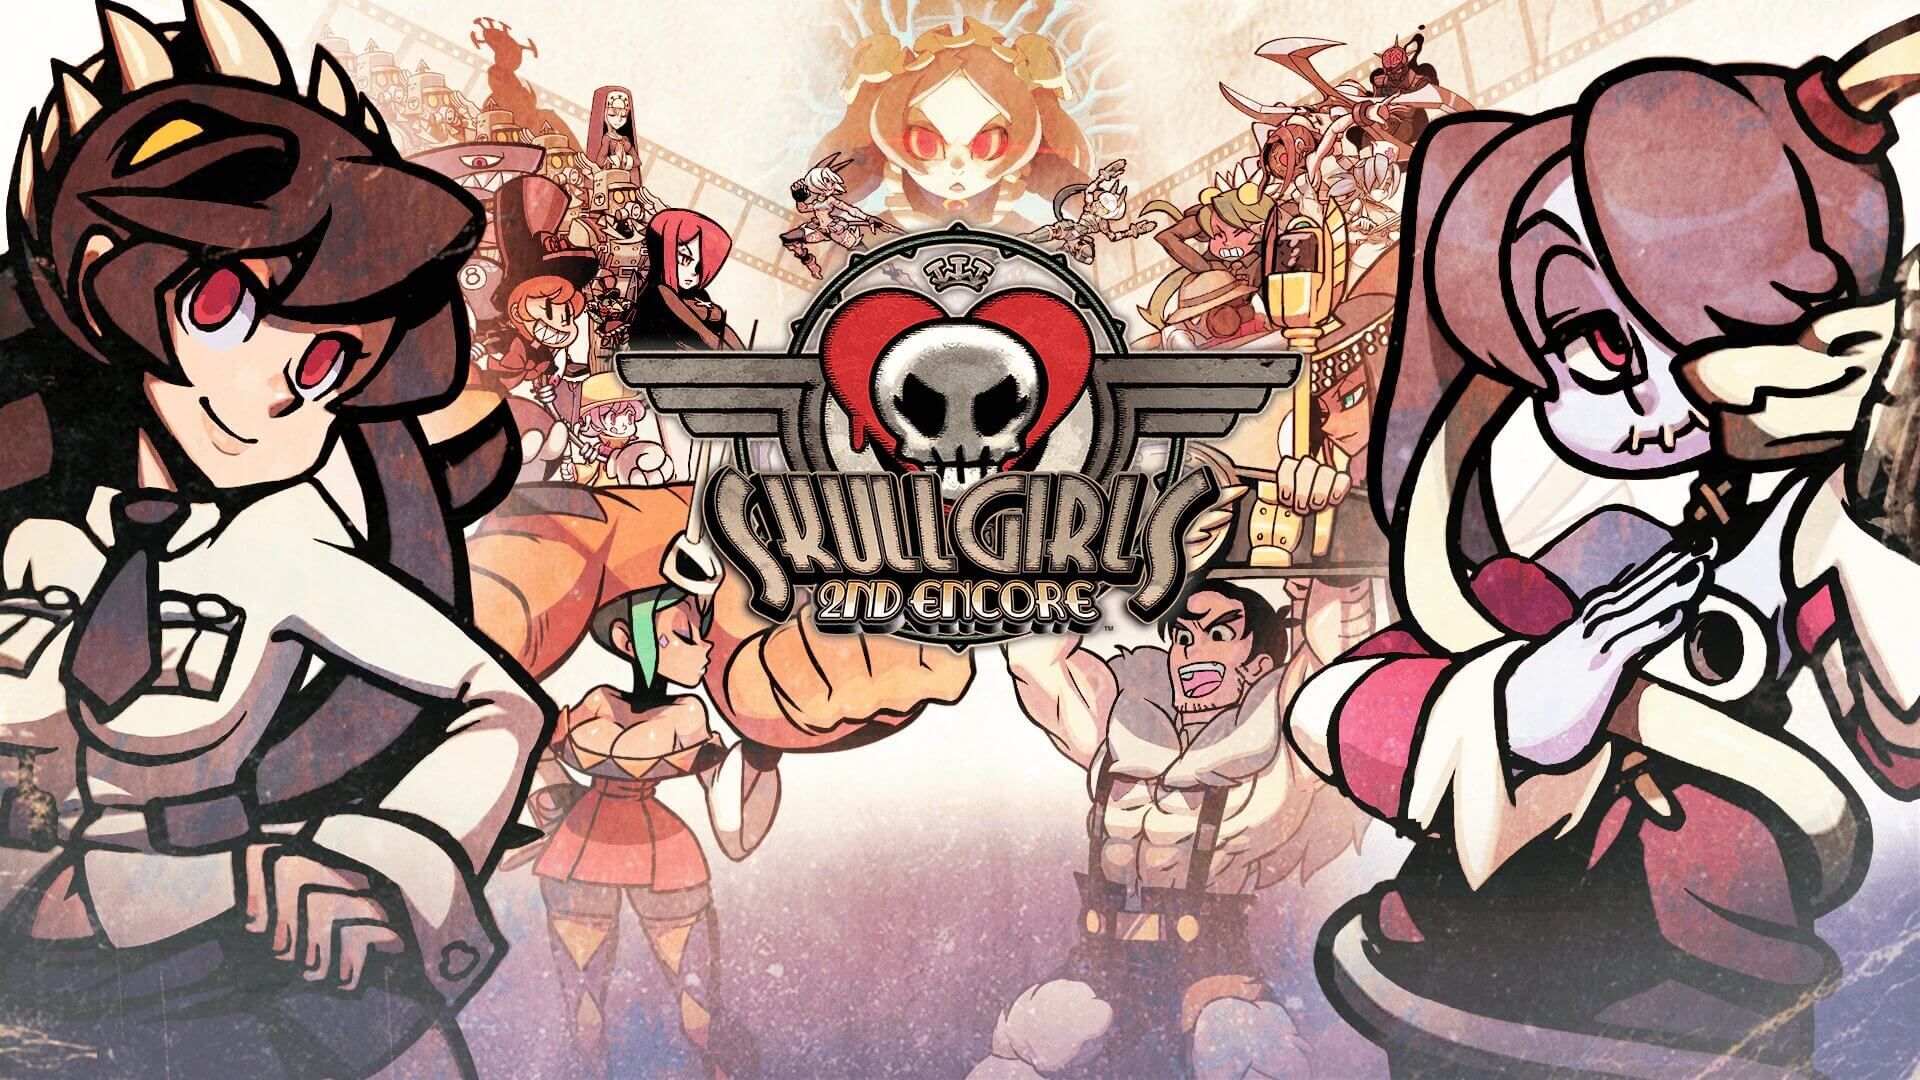 Skullgirls 2nd Encore Massive Update For Switch Is Available Now